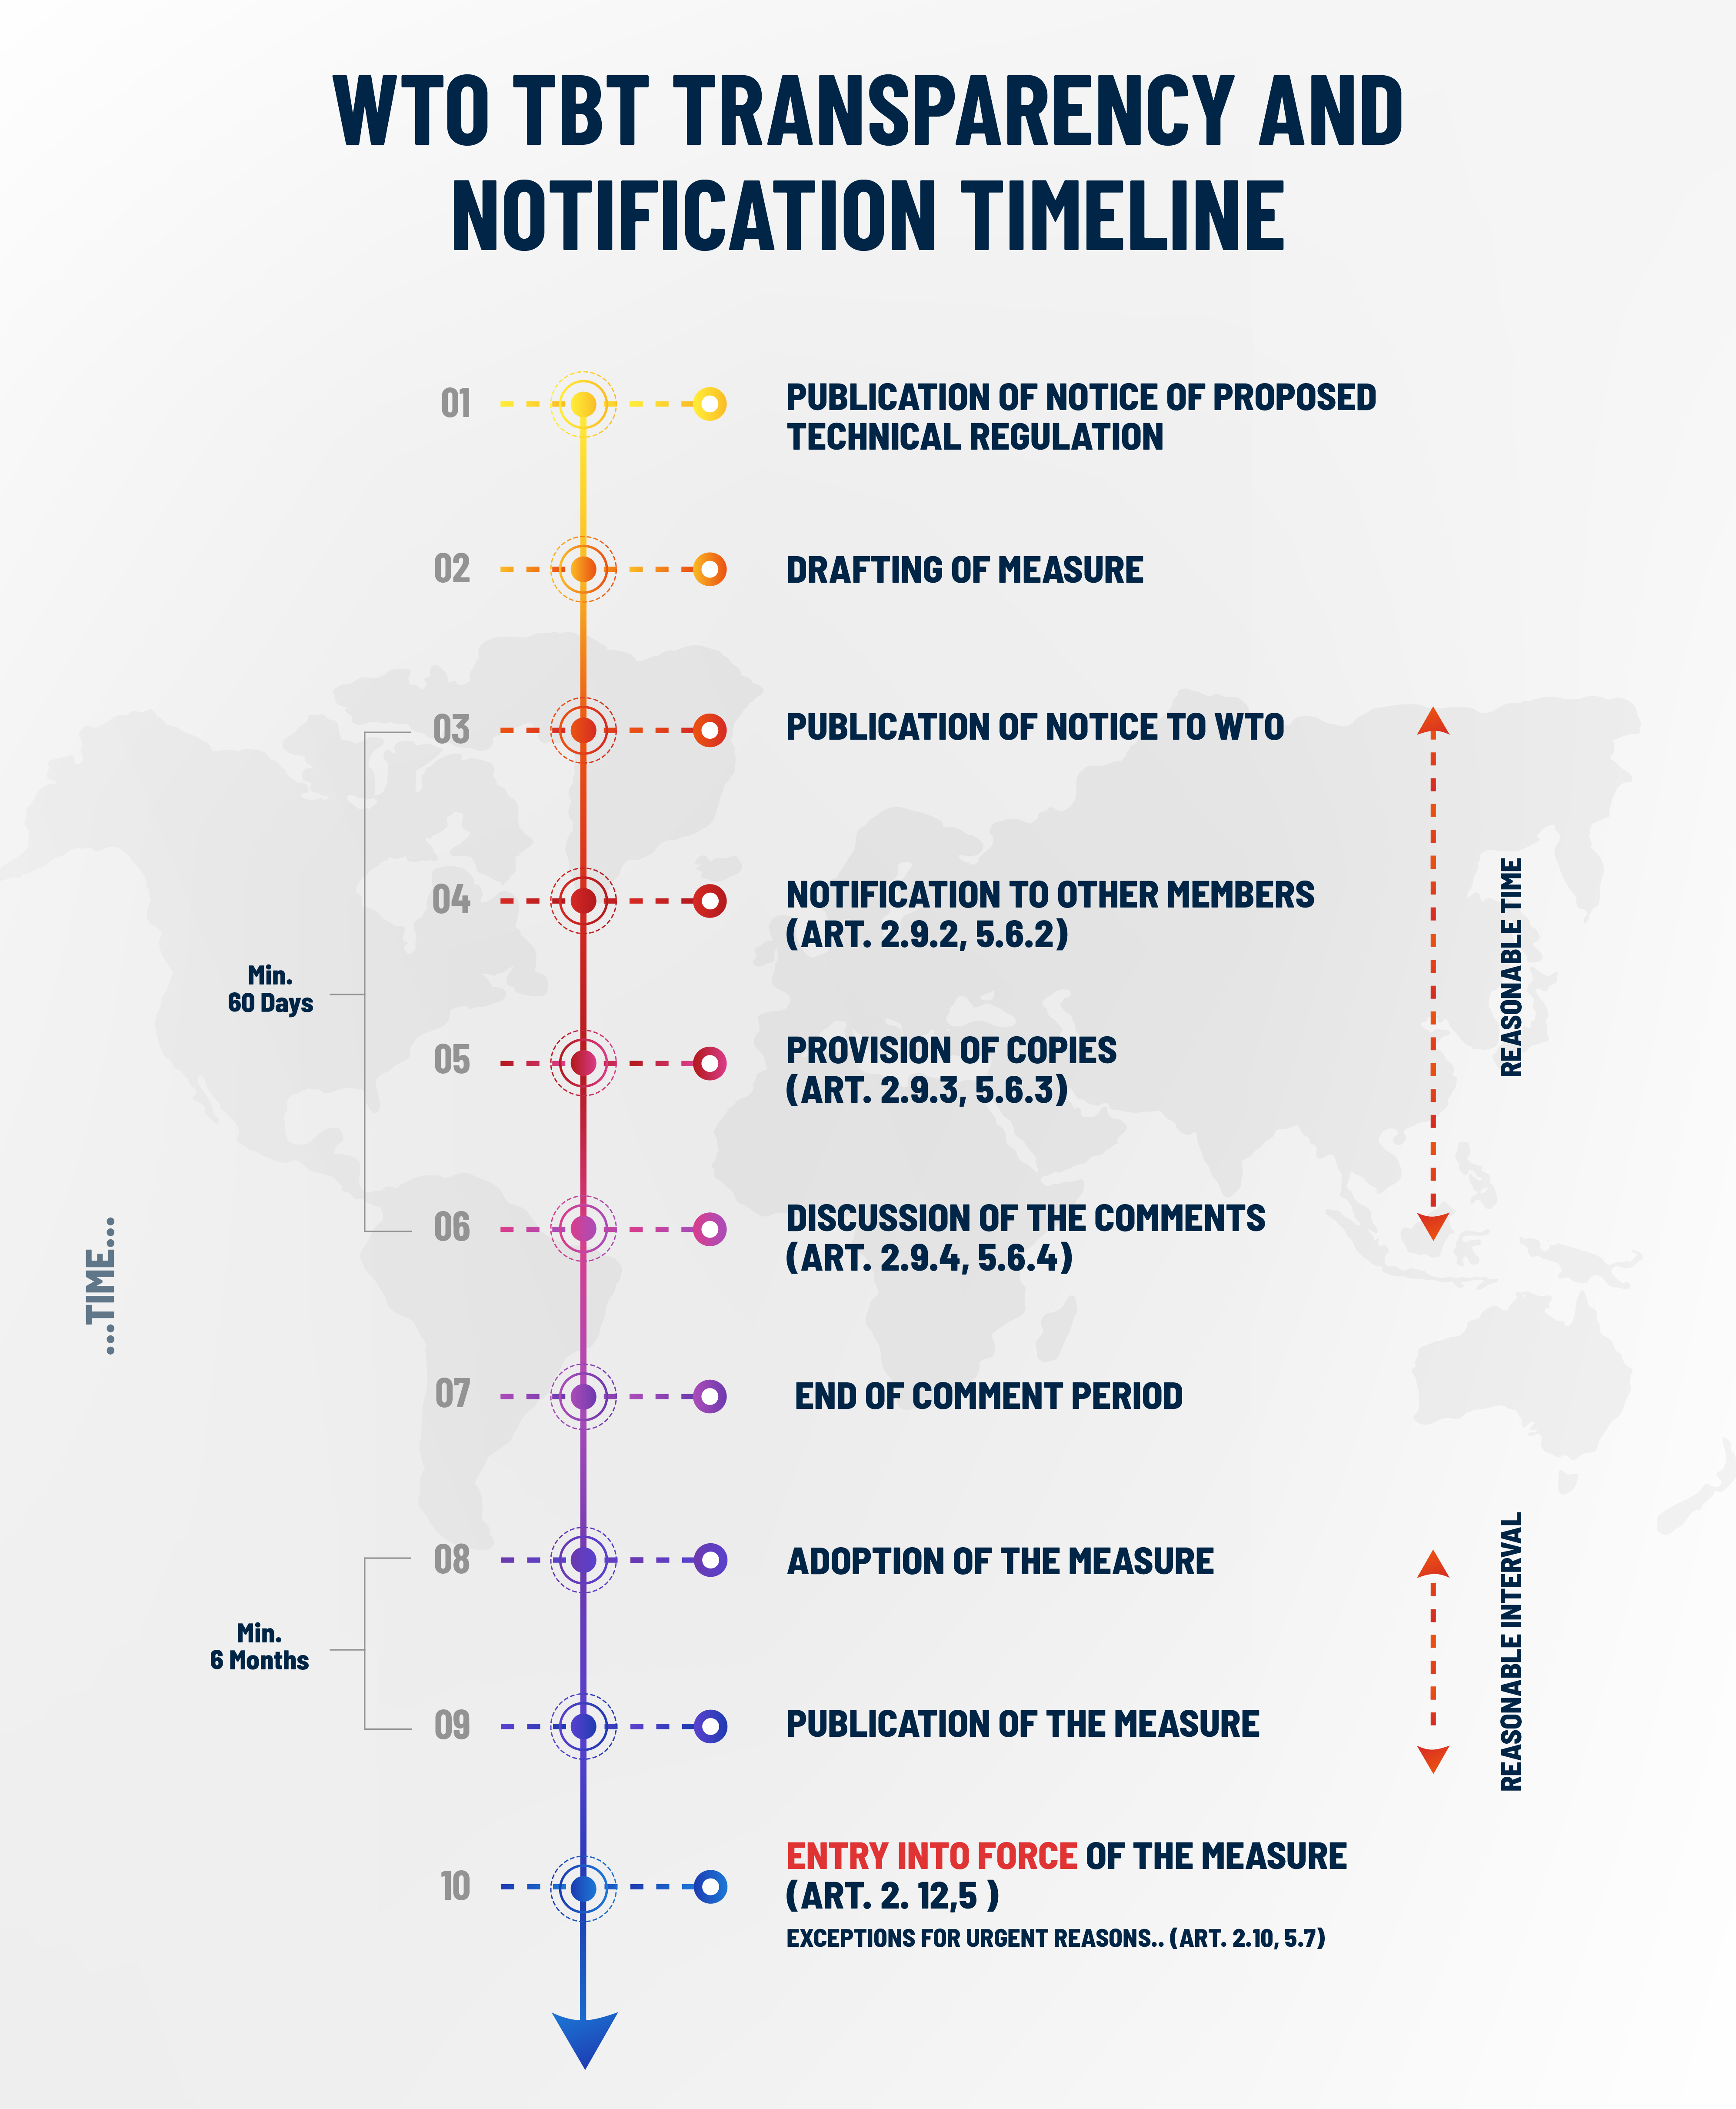 WTO TBT TRANSPARENCY AND NOTIFICATION TIMELINE